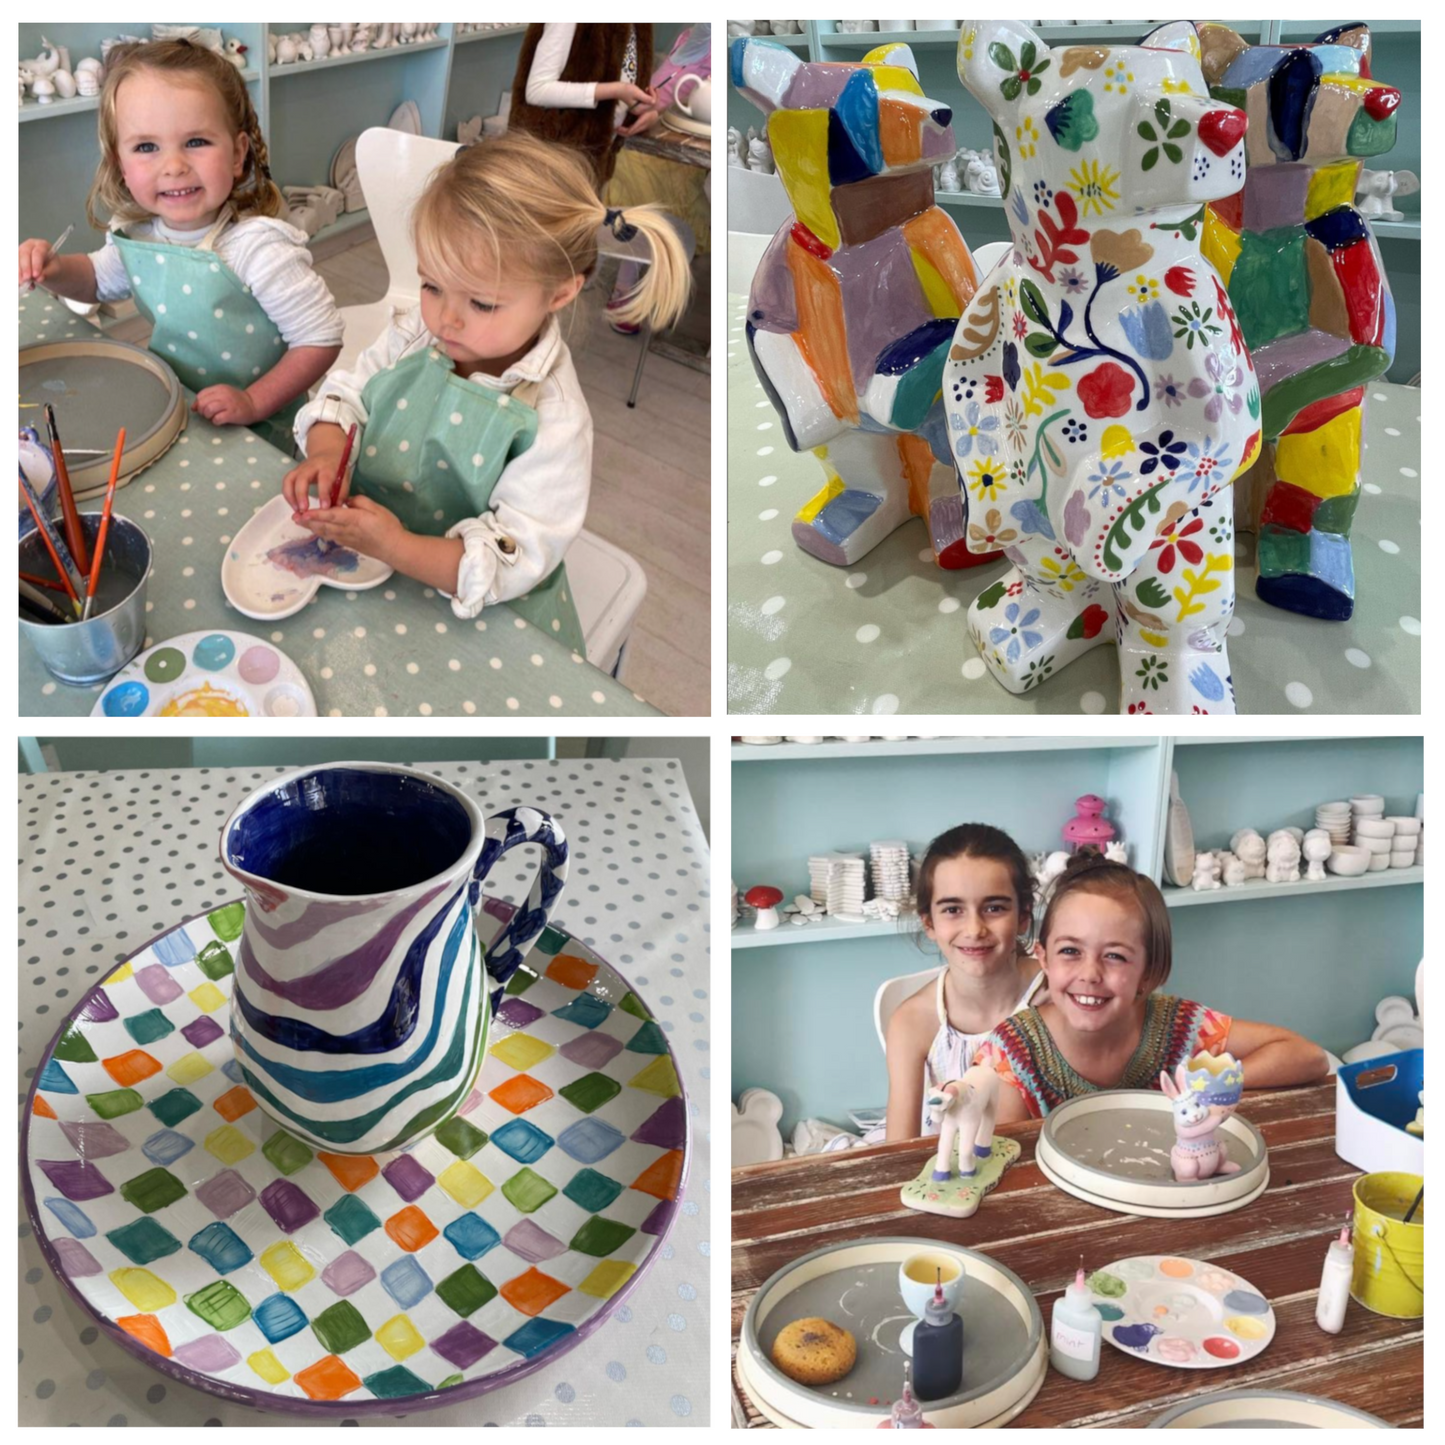 Pottery Painting Session ($5 per person deposit)